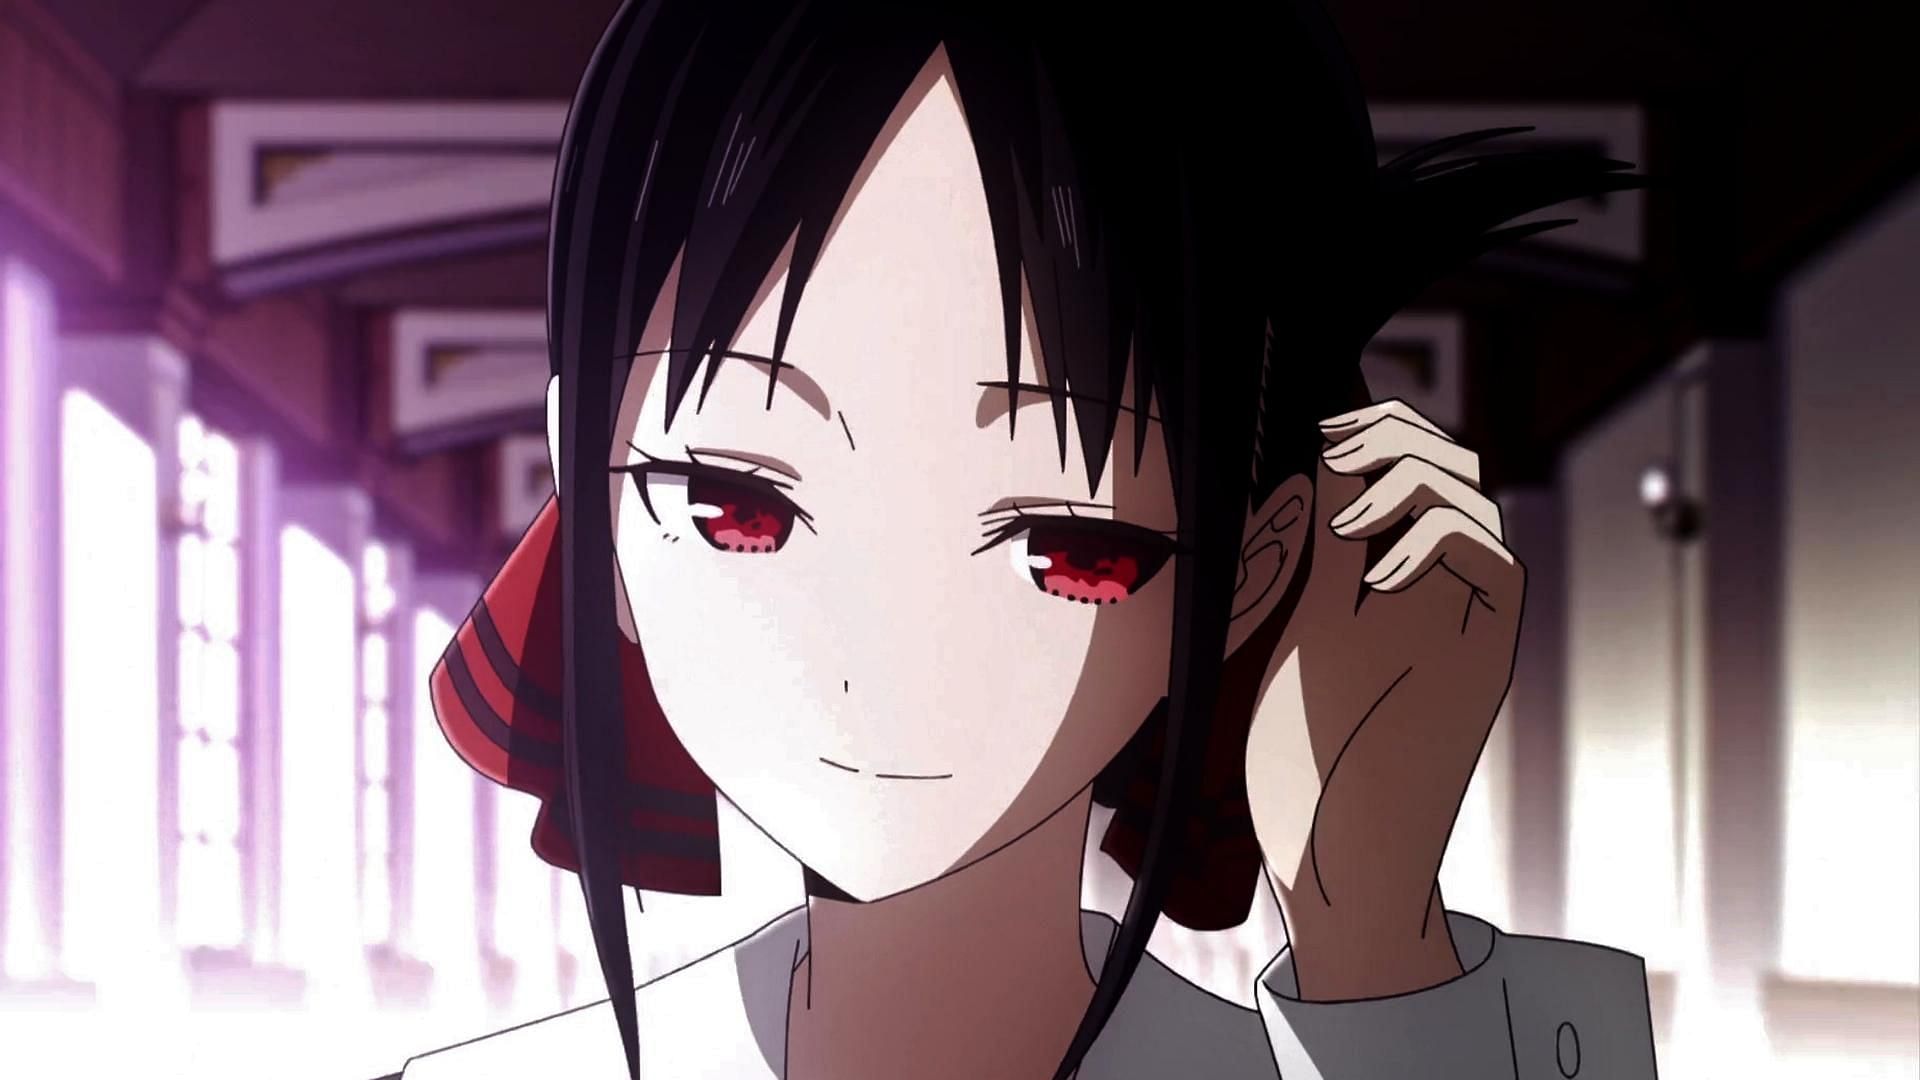 A still from the series featuring Kaguya Shinomiya (Image via A-1 Pictures)